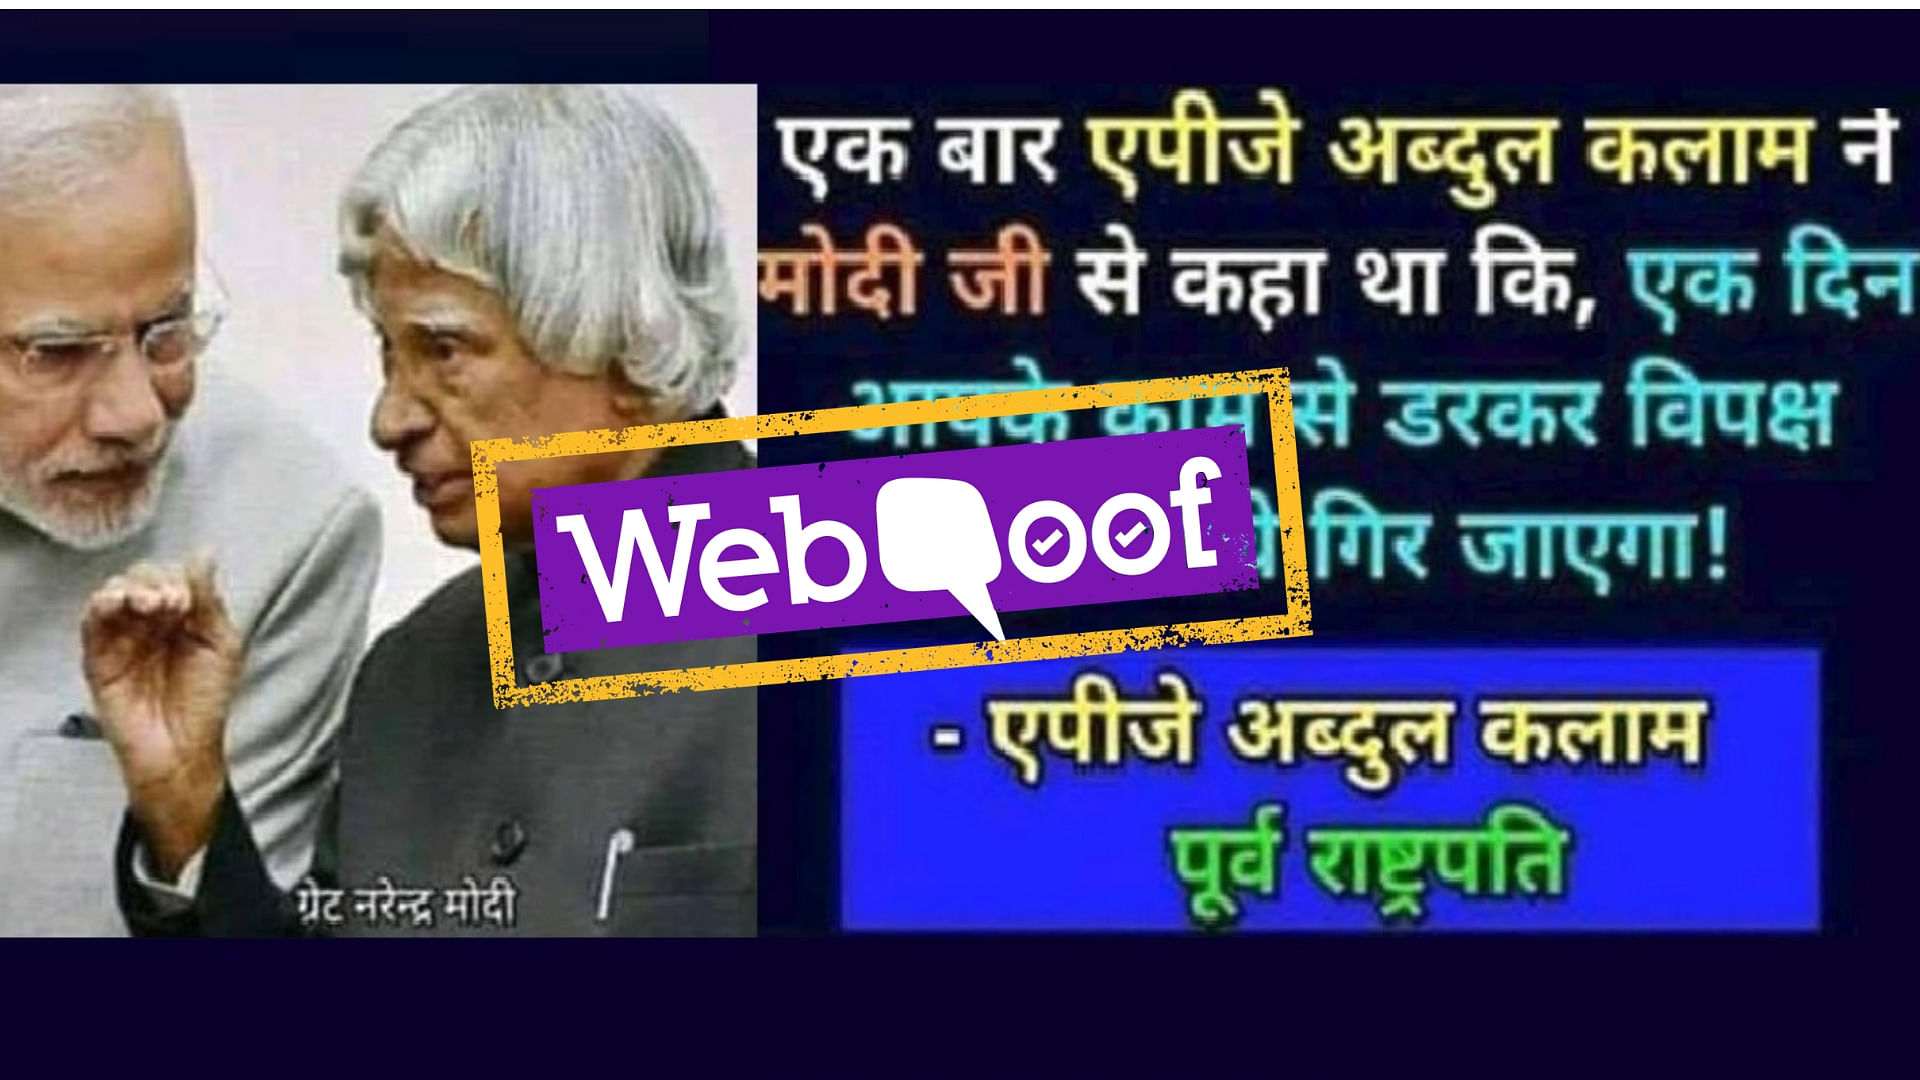 A post claiming APJ Abdul Kalam had told PM Modi that the Opposition will ‘fear’ the leader for his work one day has gone viral on Facebook.